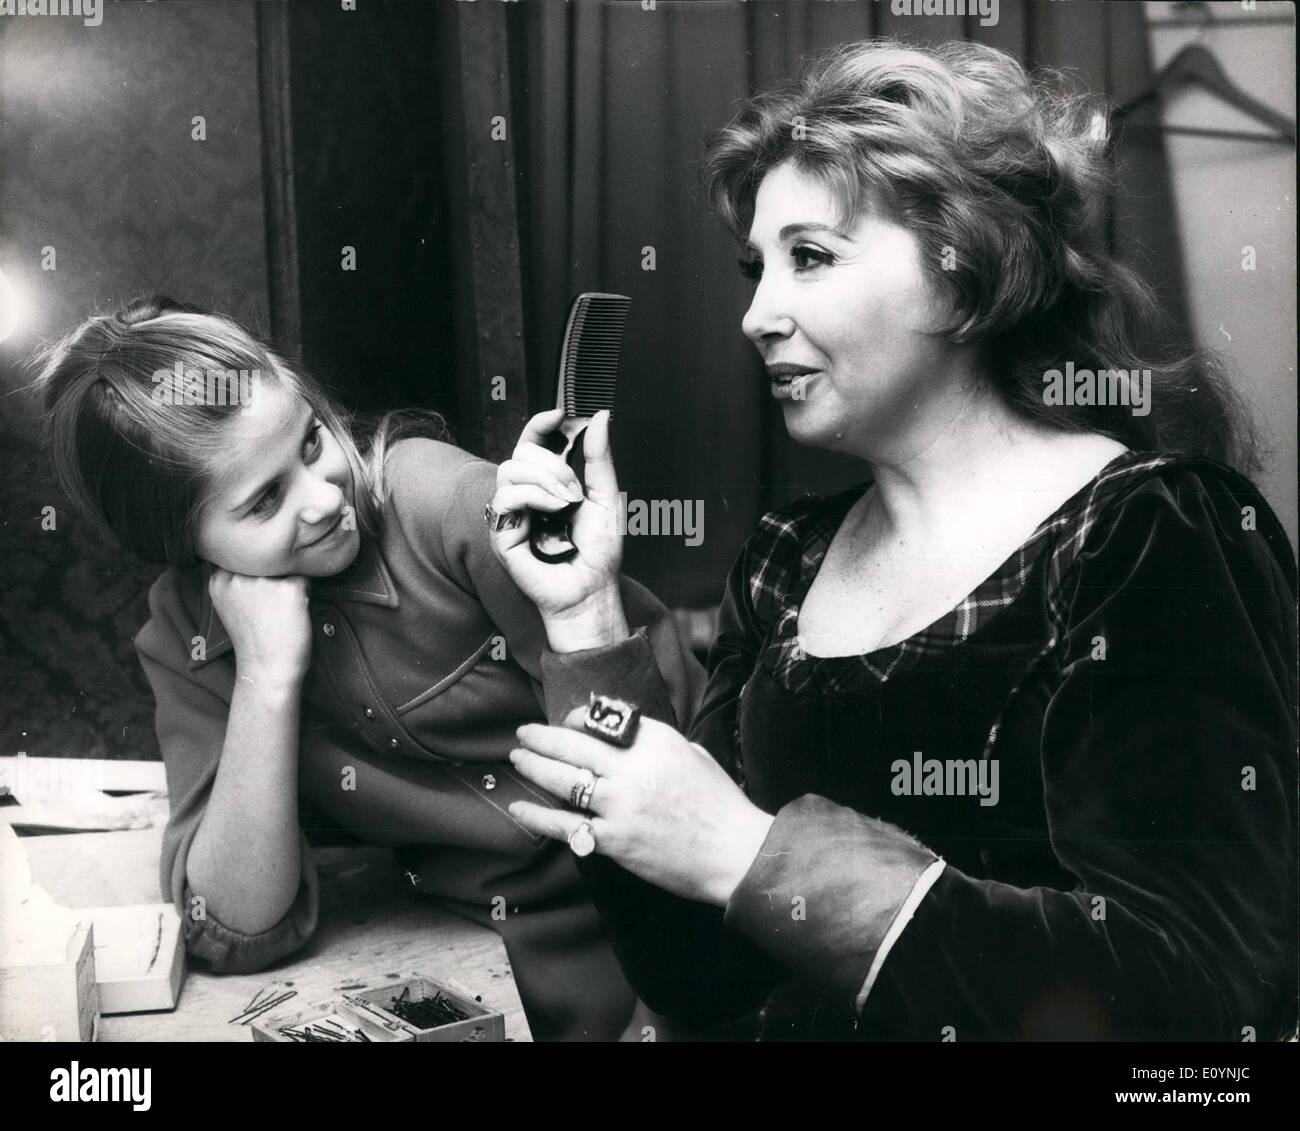 Dec. 12, 1970 - 11-year-old Muffy who is deaf arrives here for her opera Mother's British debut at Covent Garden. Beverly Sills, the idol of America's opera public, makes her British debut at the Royal Opera House, Covent Garden, on Wednesday December 23rd. Her 11-year-old daughter, Muffy has come here for the occasion. Muffy adores opera yet the sad thing is that she has never heard her mother sing a note, for she is deaf. Beverly is now rated on both sides of the Atlantic as something special among operatio sopranos Stock Photo